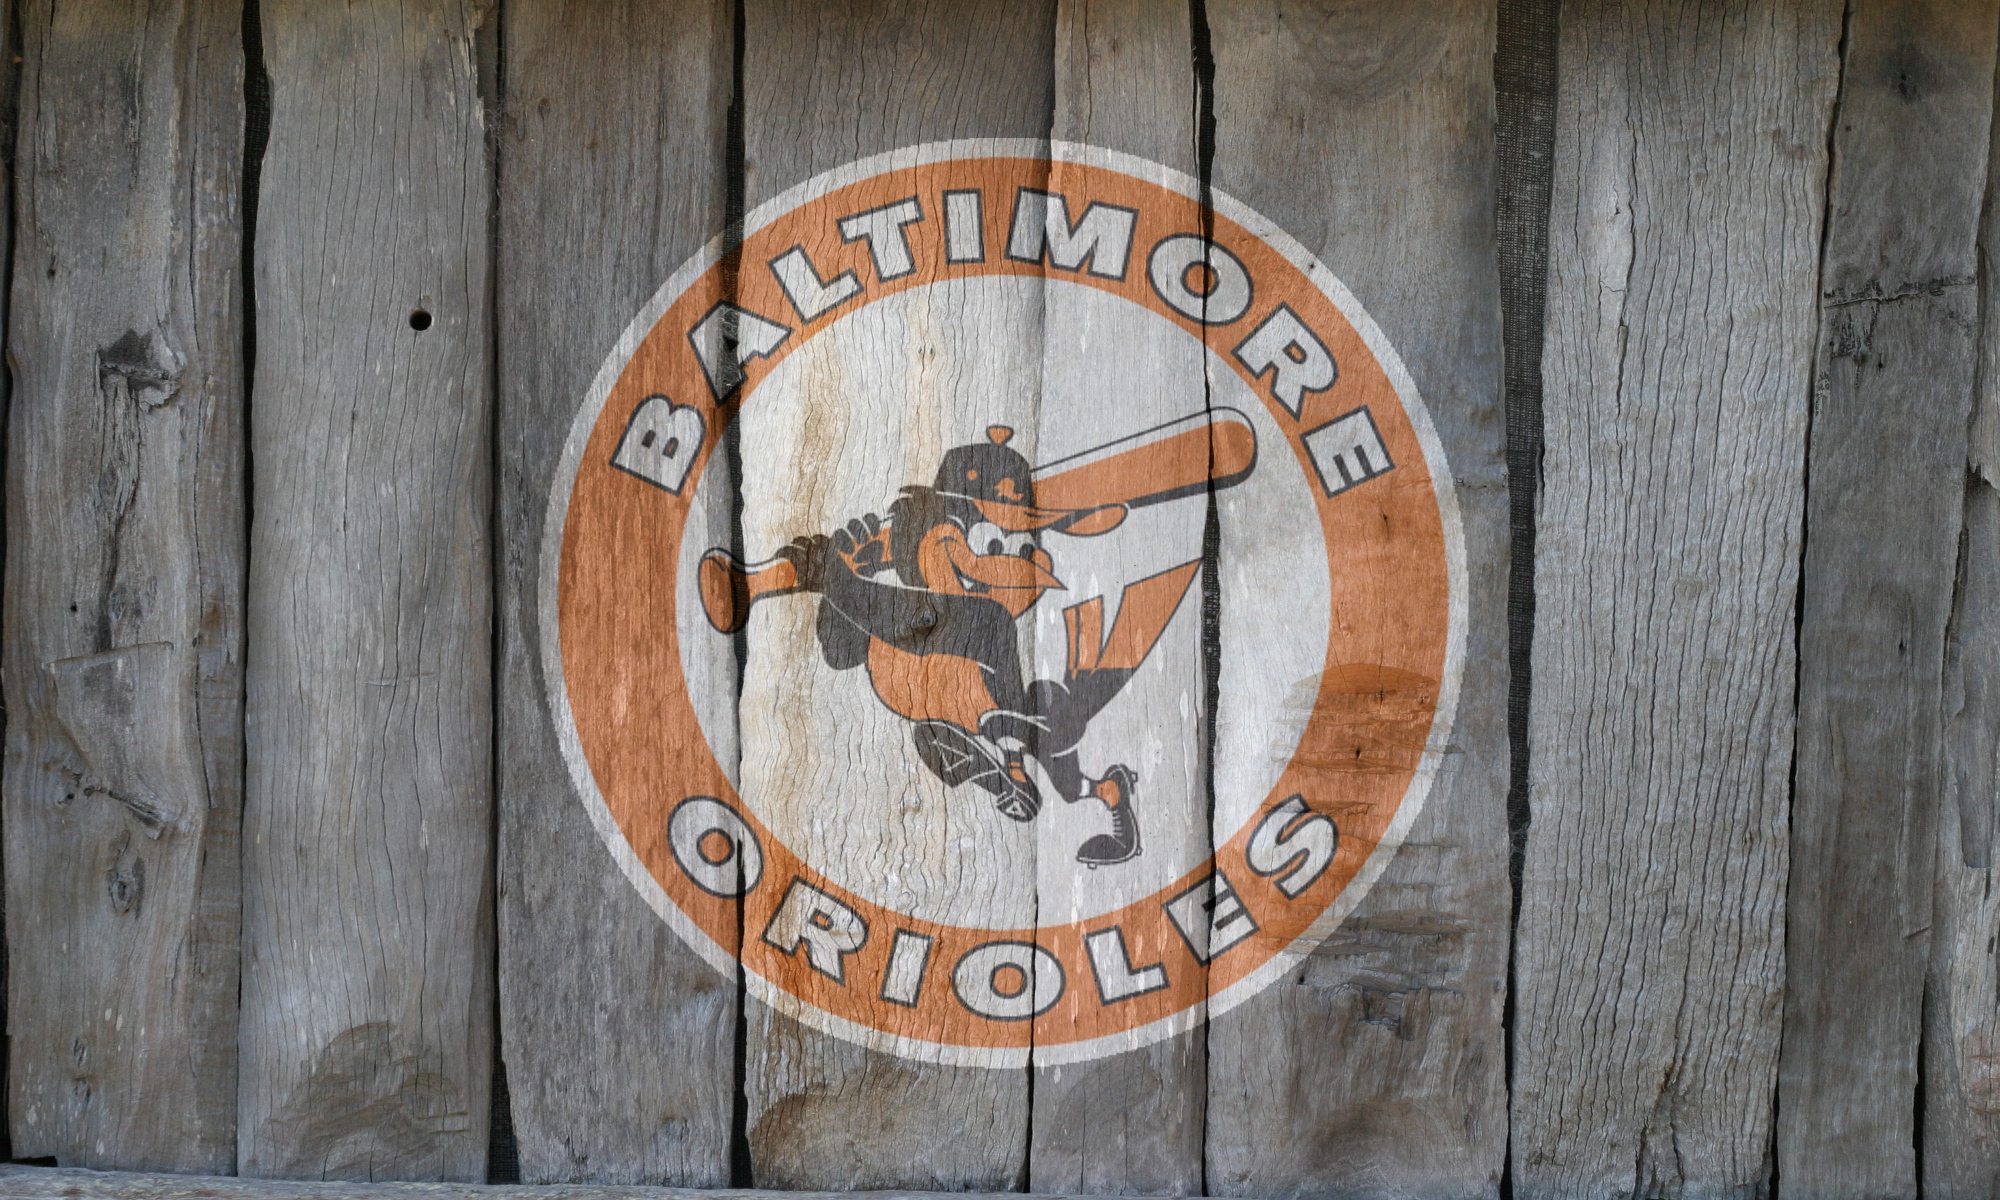 Throwback Baltimore Orioles Logo On Wood Fence By Oultre X